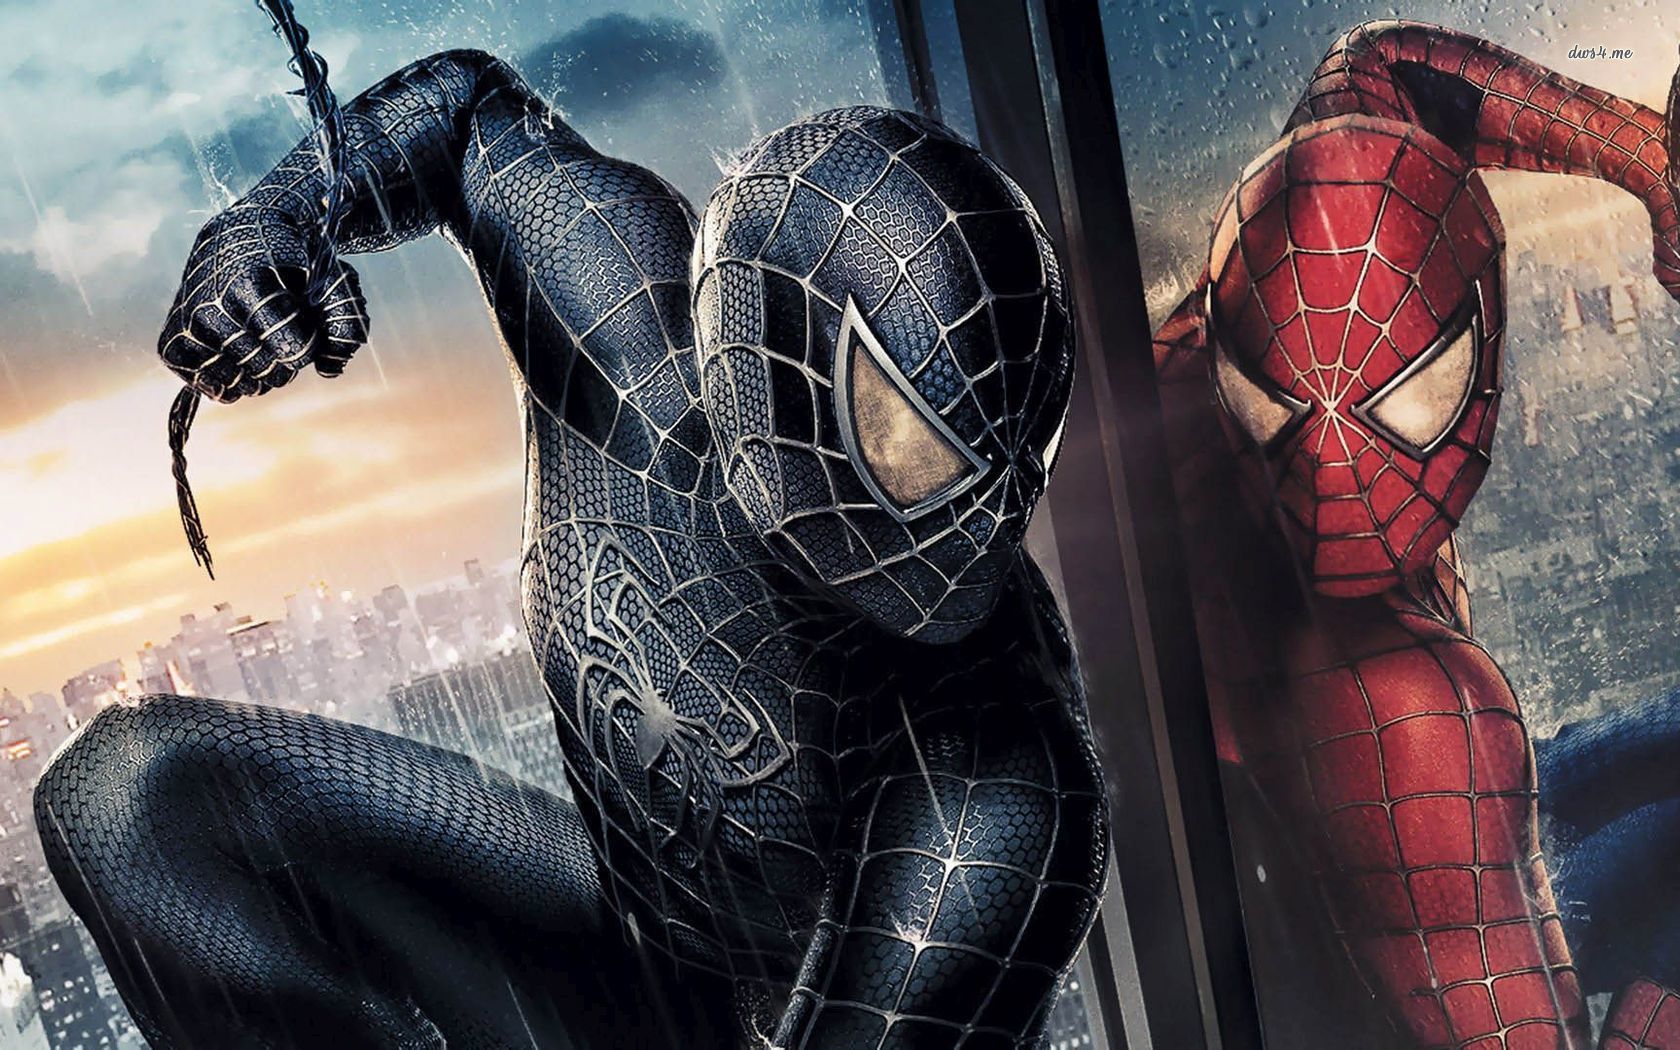 Spider-Man on the building - The Amazing Spider-Man wallpaper ...